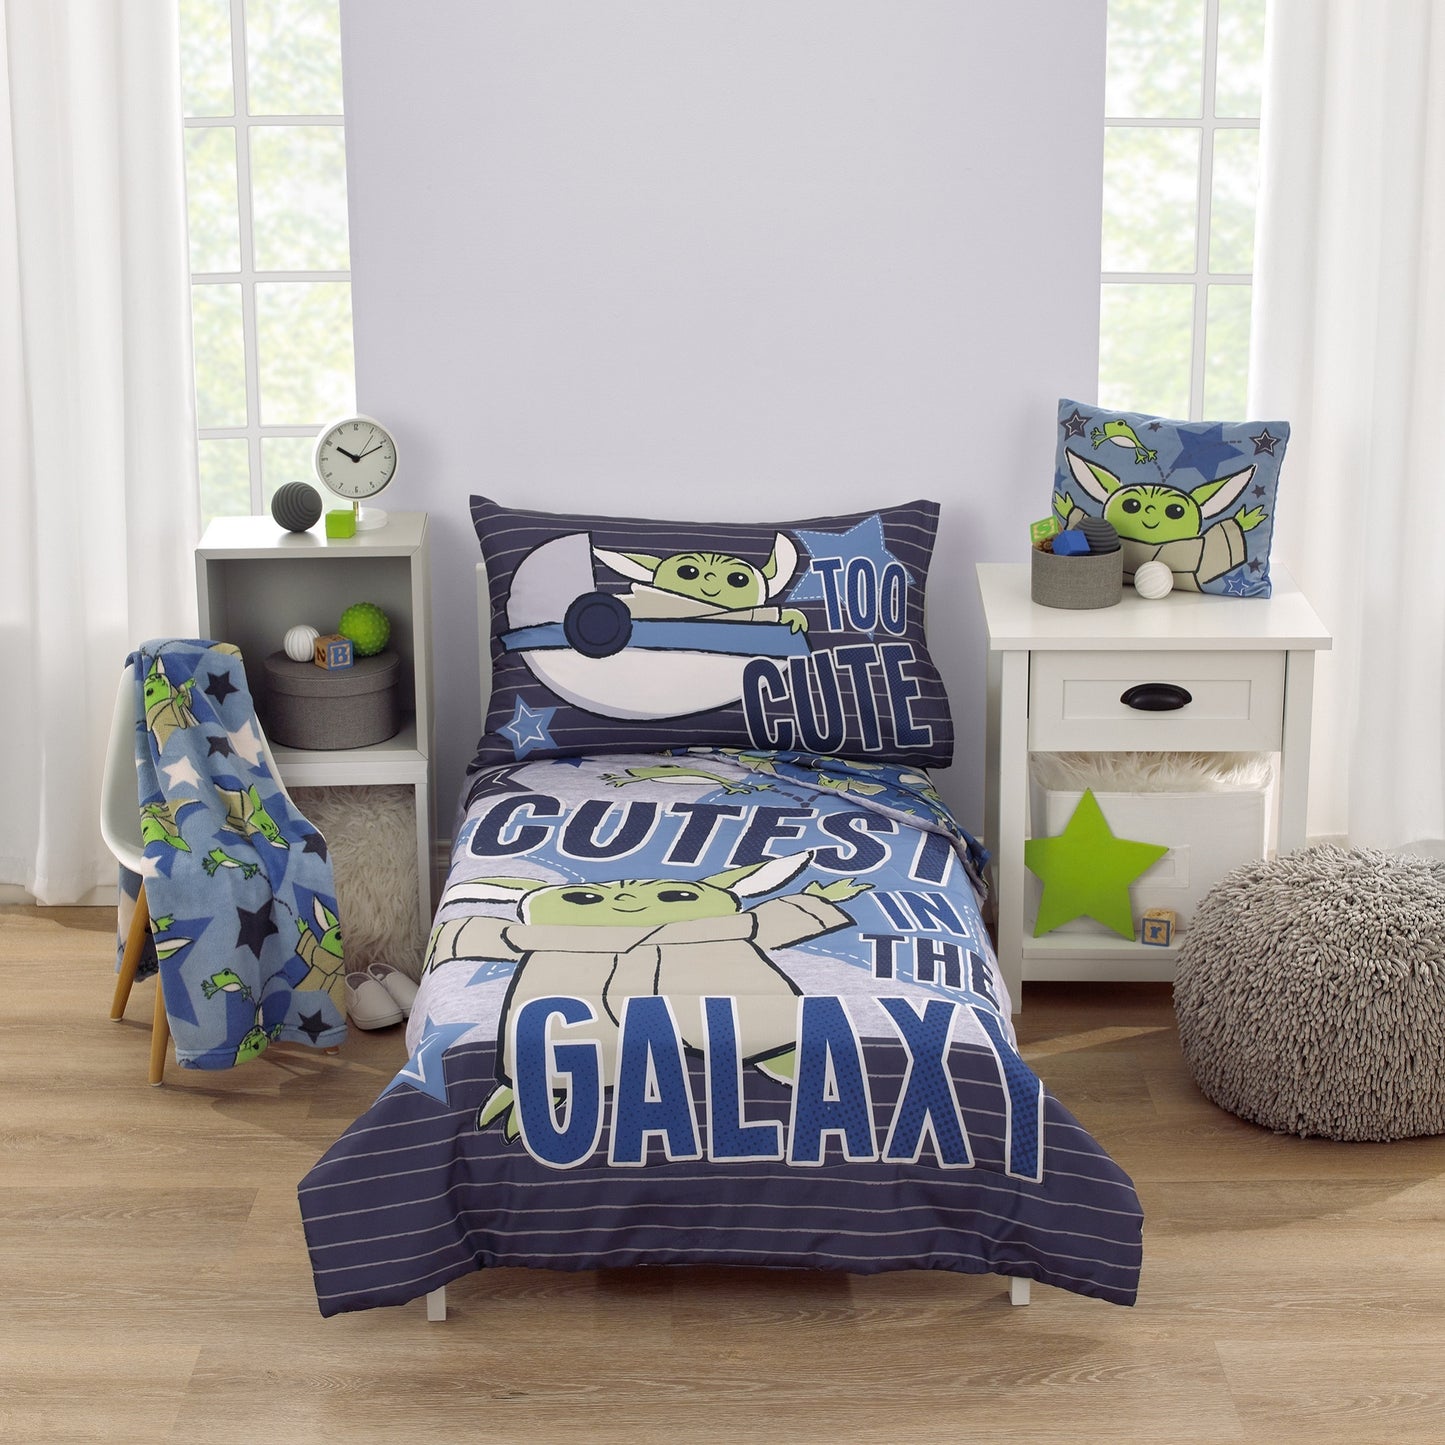 Star Wars The Child Cutest in the Galaxy Blue, Green and Gray, Grogu, Sorgan Frog and Stars Super Soft Decorative Toddler Pillow